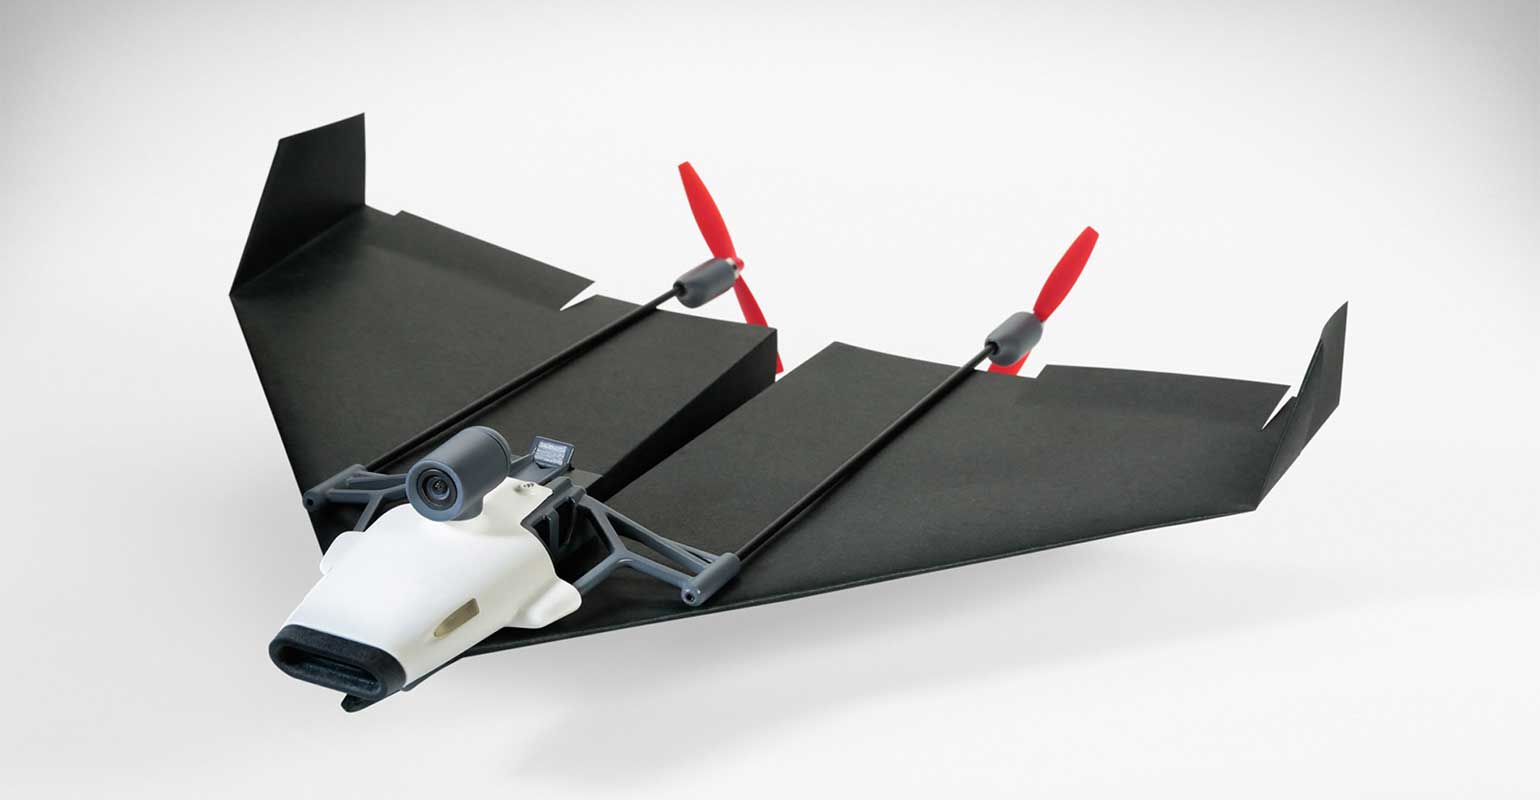 Standard Lydig Ond A Paper Airplane Drone That&#39s Nearly Indestructible